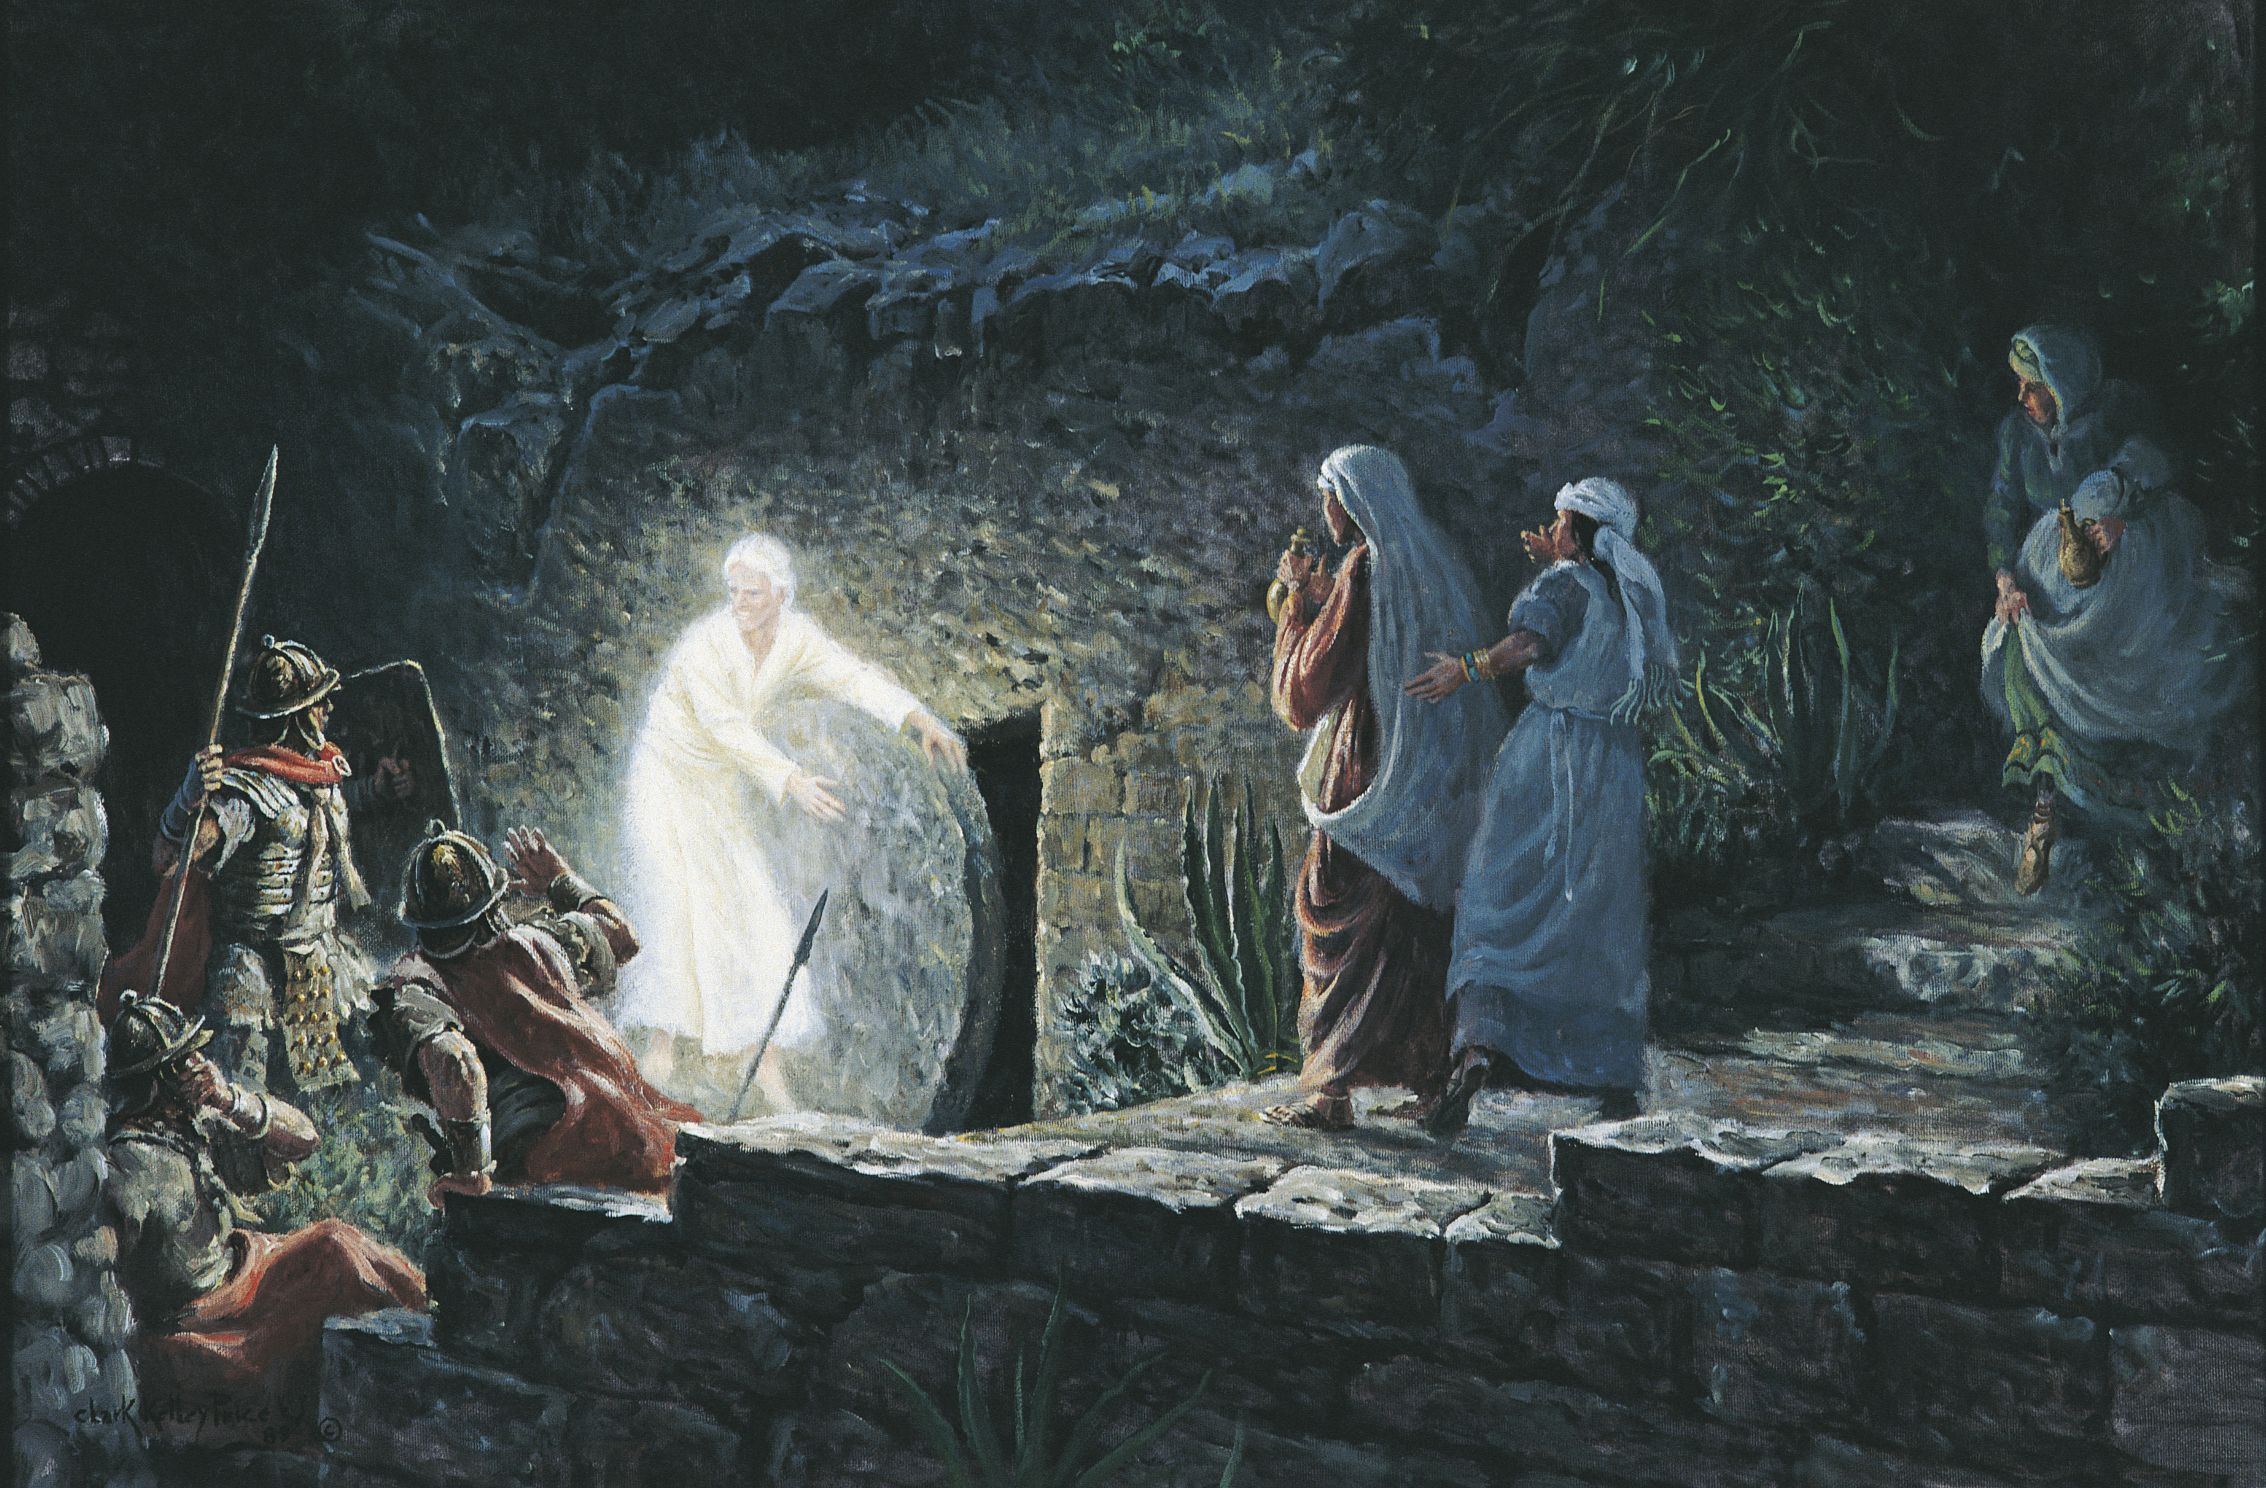 If the Resurrected Jesus had the Power to Walk Through Locked Doors, Why did He Need an Angel to Open his Sealed Tomb?